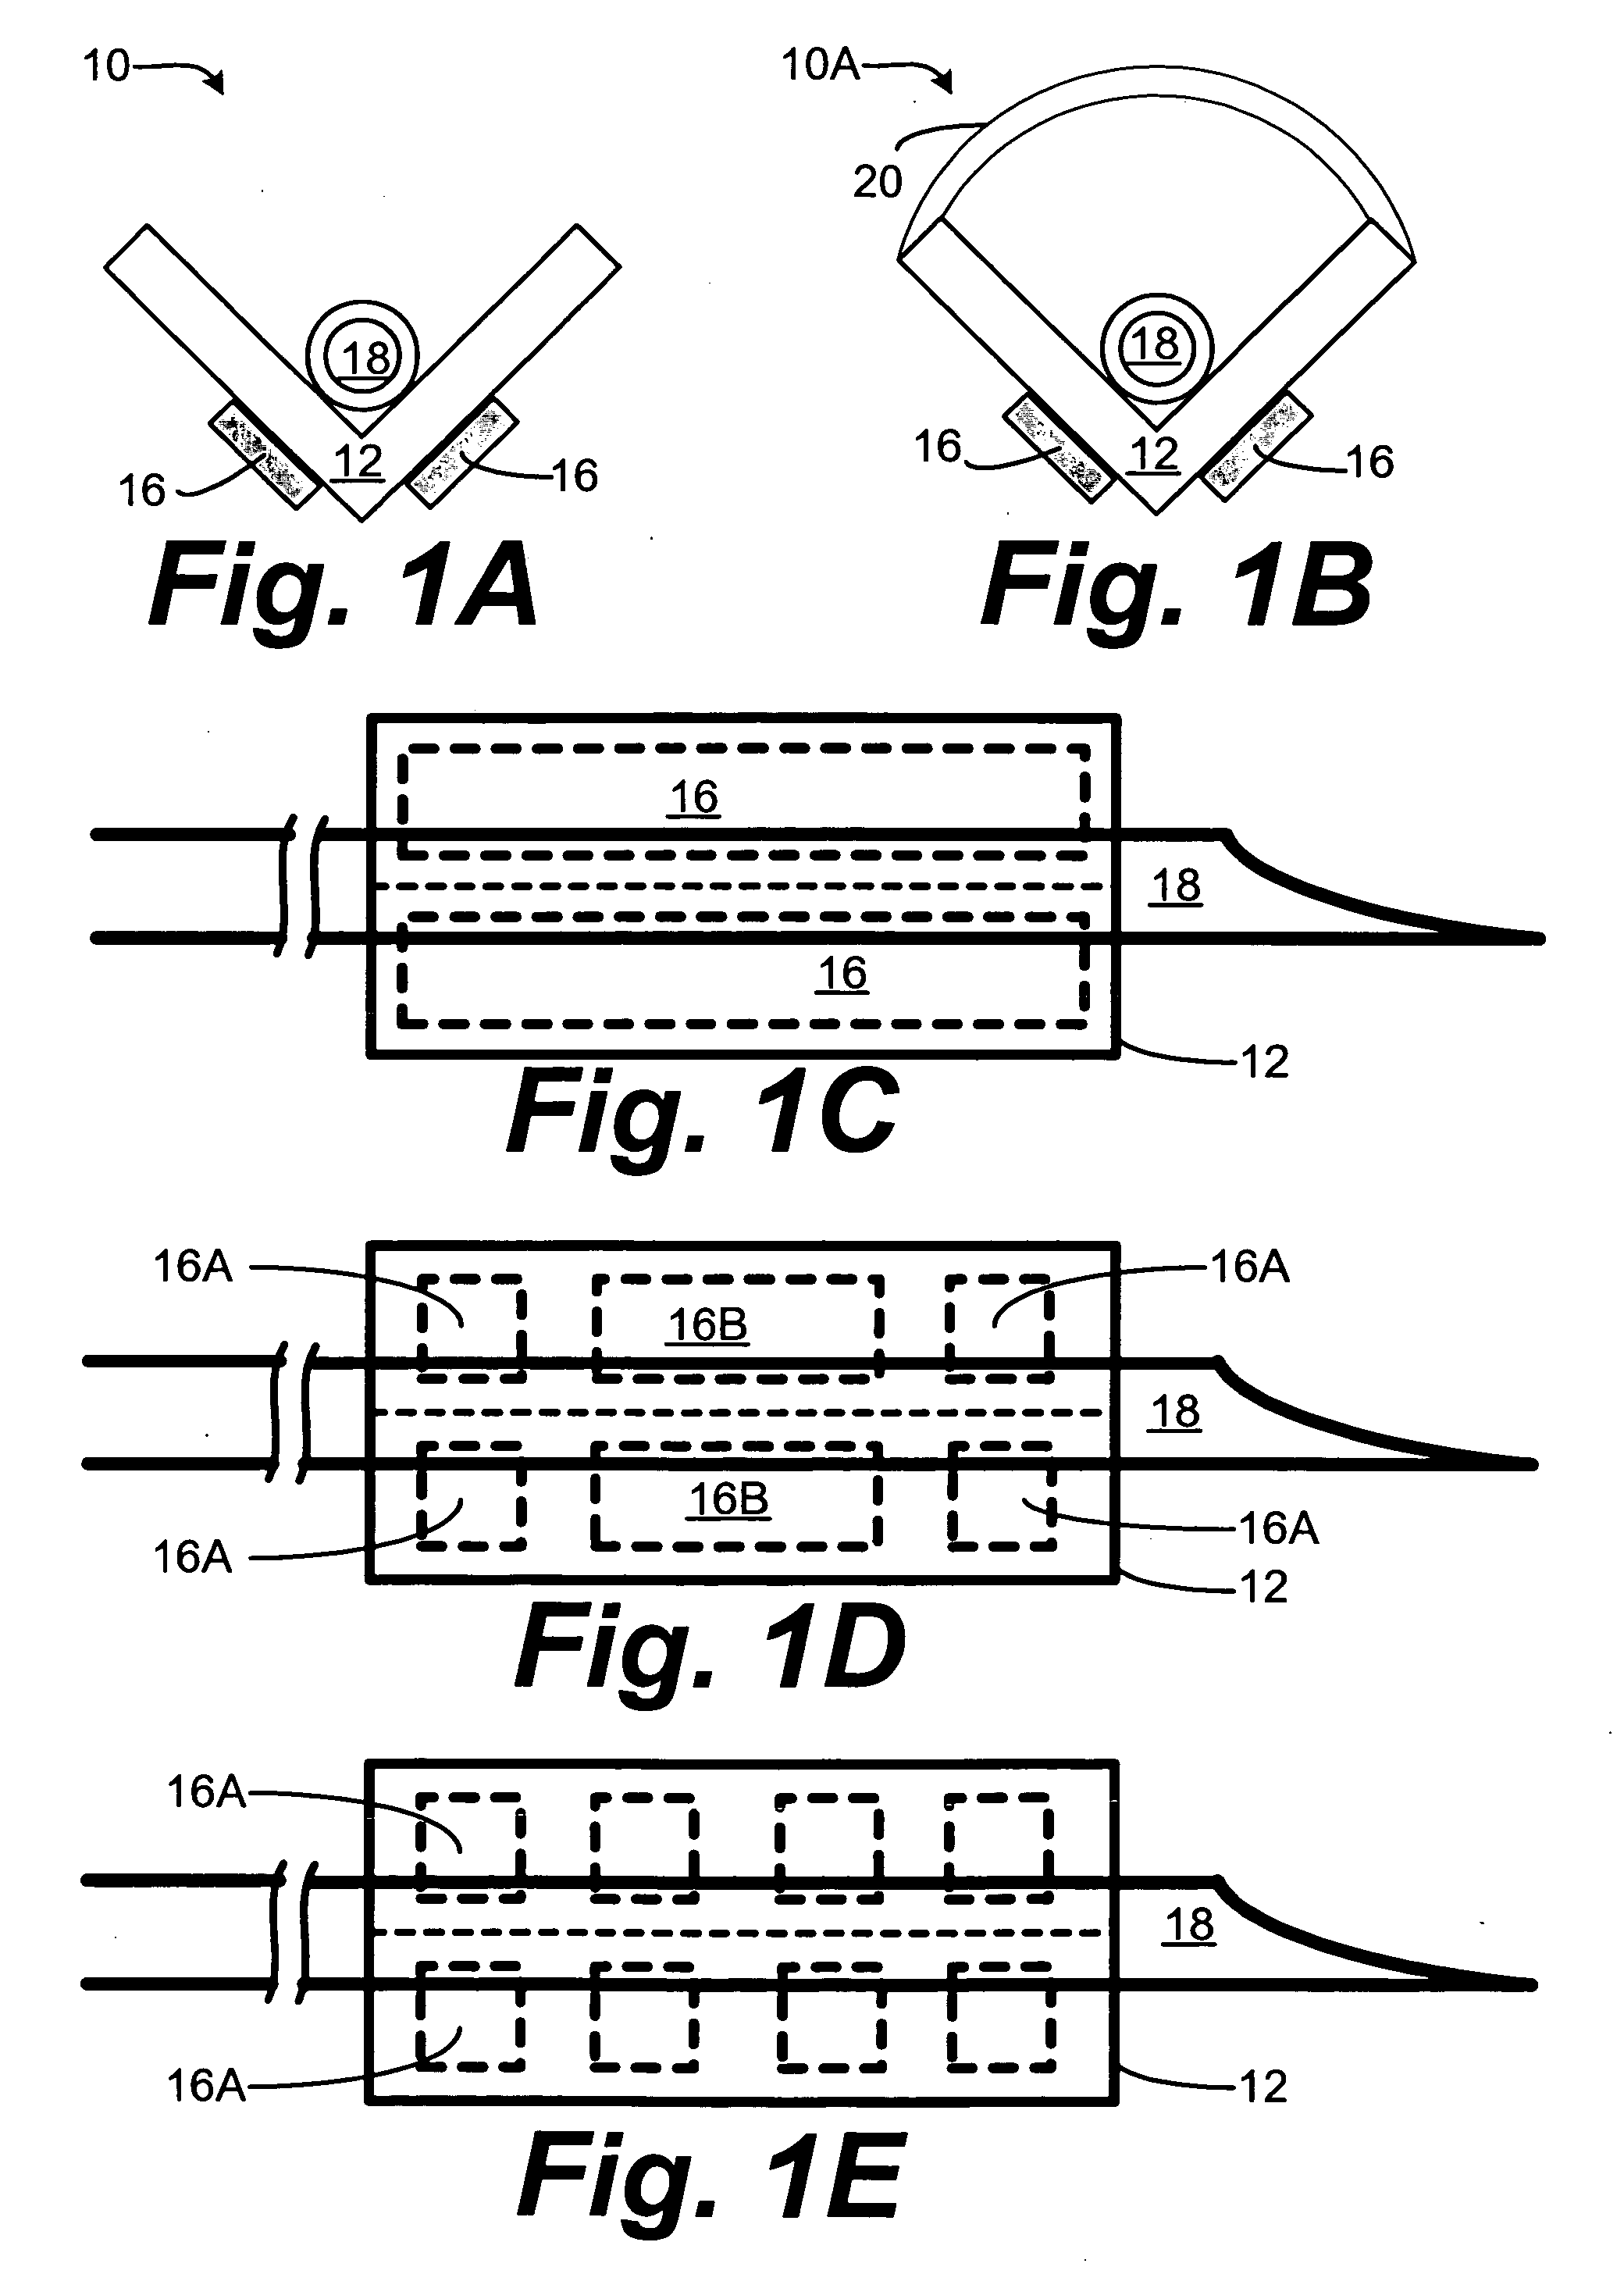 Apparatus and method for image guided insertion and removal of a cannula or needle